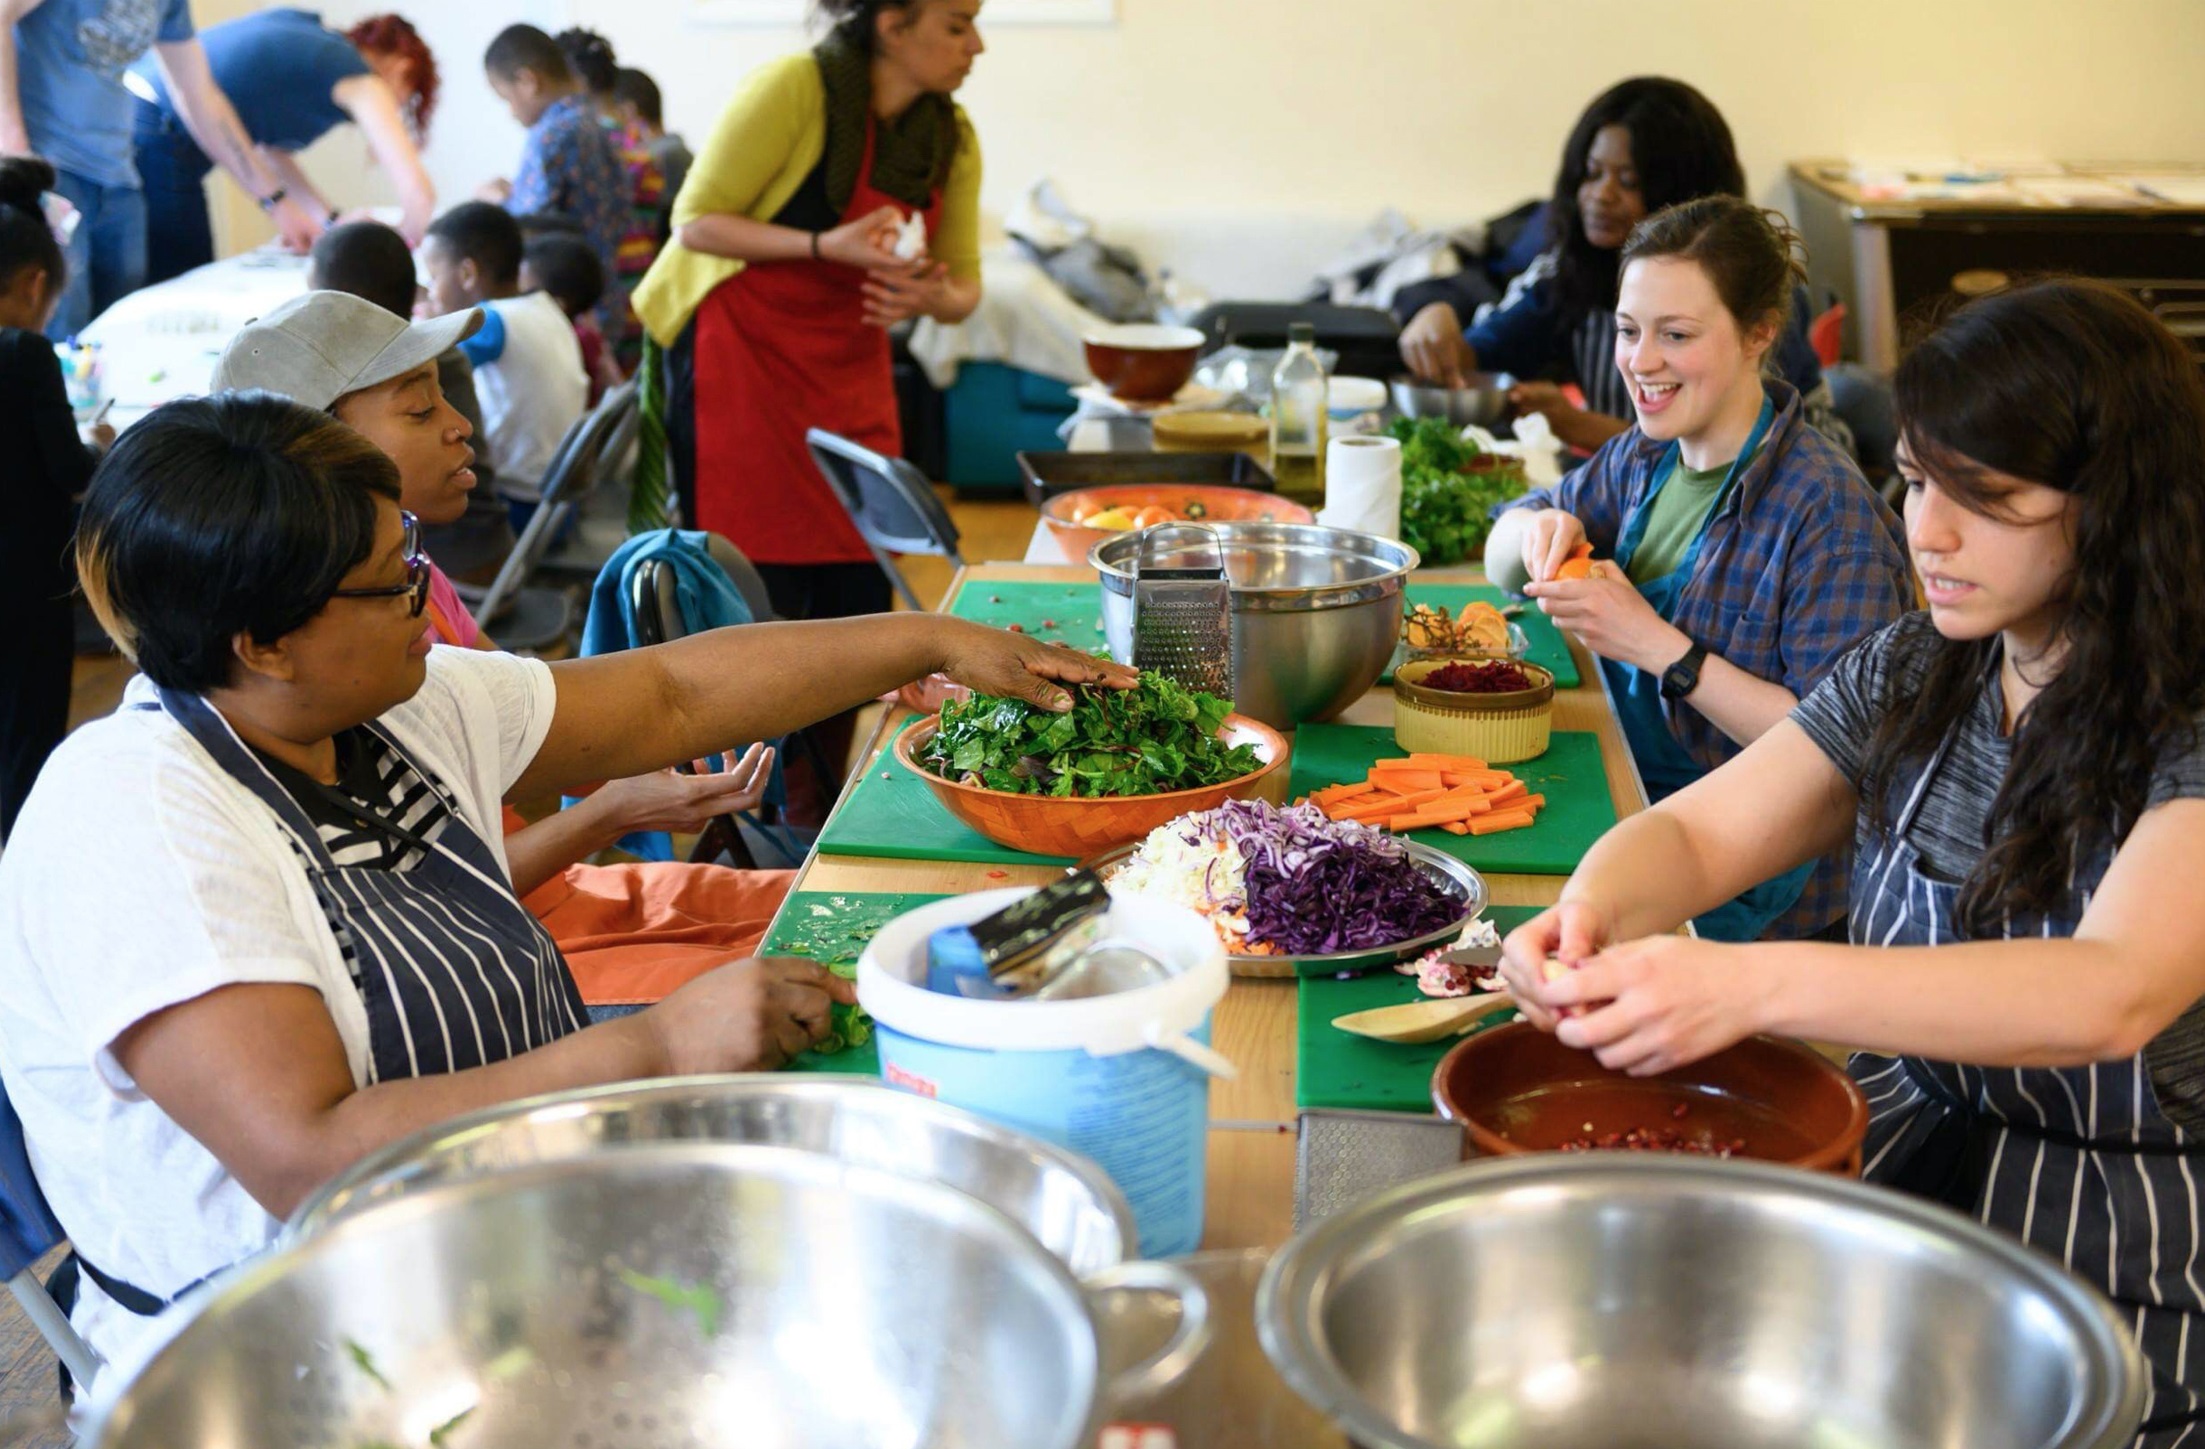 Eat, grow, share: Communities building food resilience